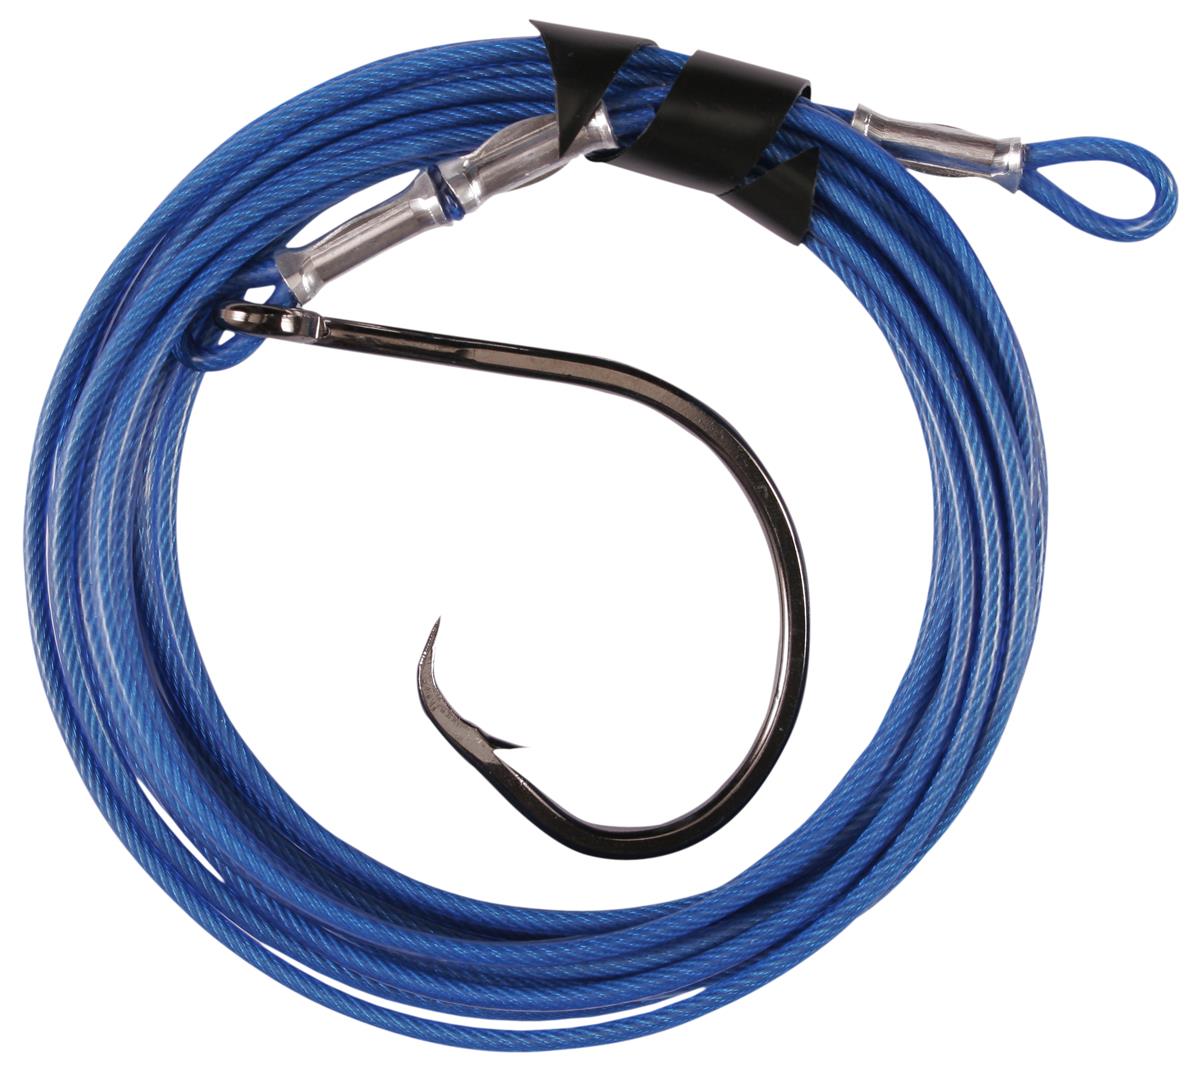 Surf Shark Pulley Rig - 10/0 Inline Circle Hook, 170lb Wire - Shark rig for surf  fishing